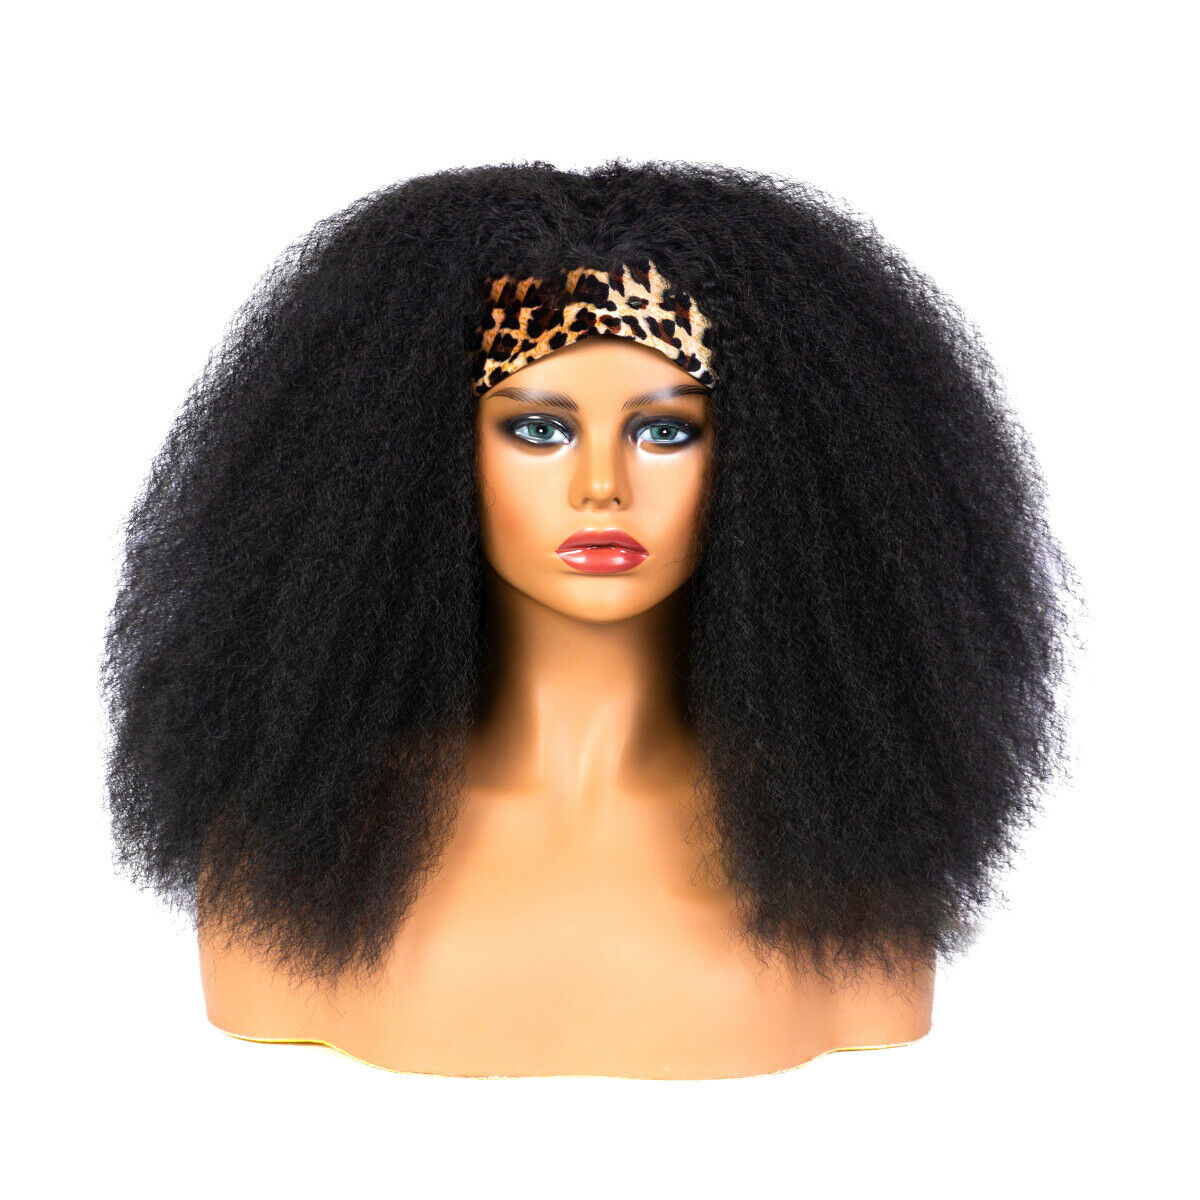 Afro Yaki Kinky Straight Wrap Wigs for Black Women African Curly Hair Full Wigs